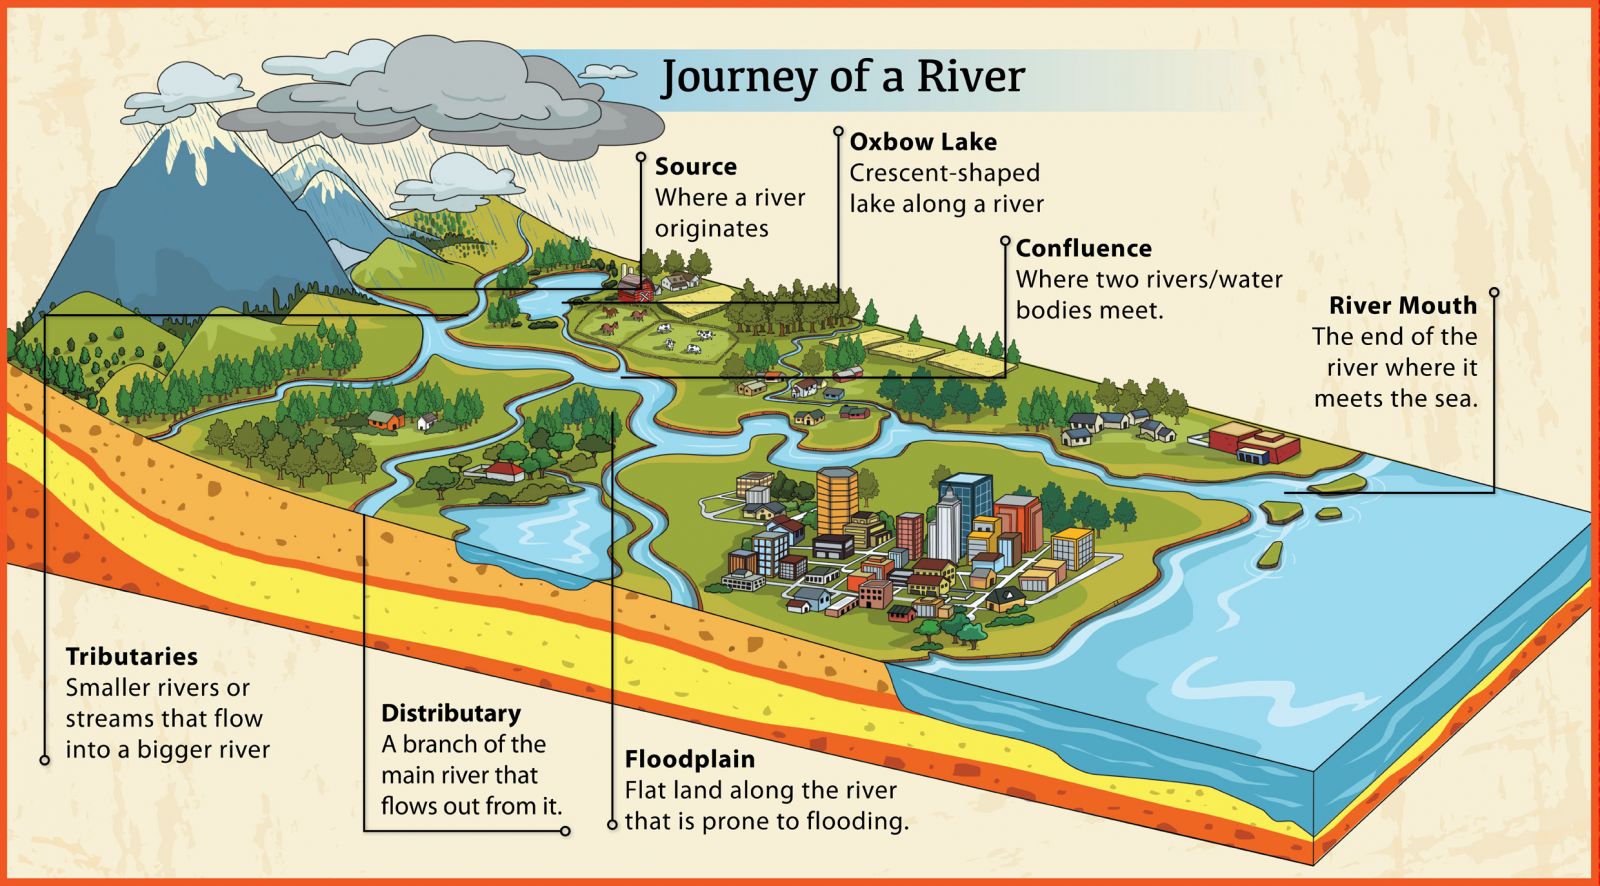 a river's journey